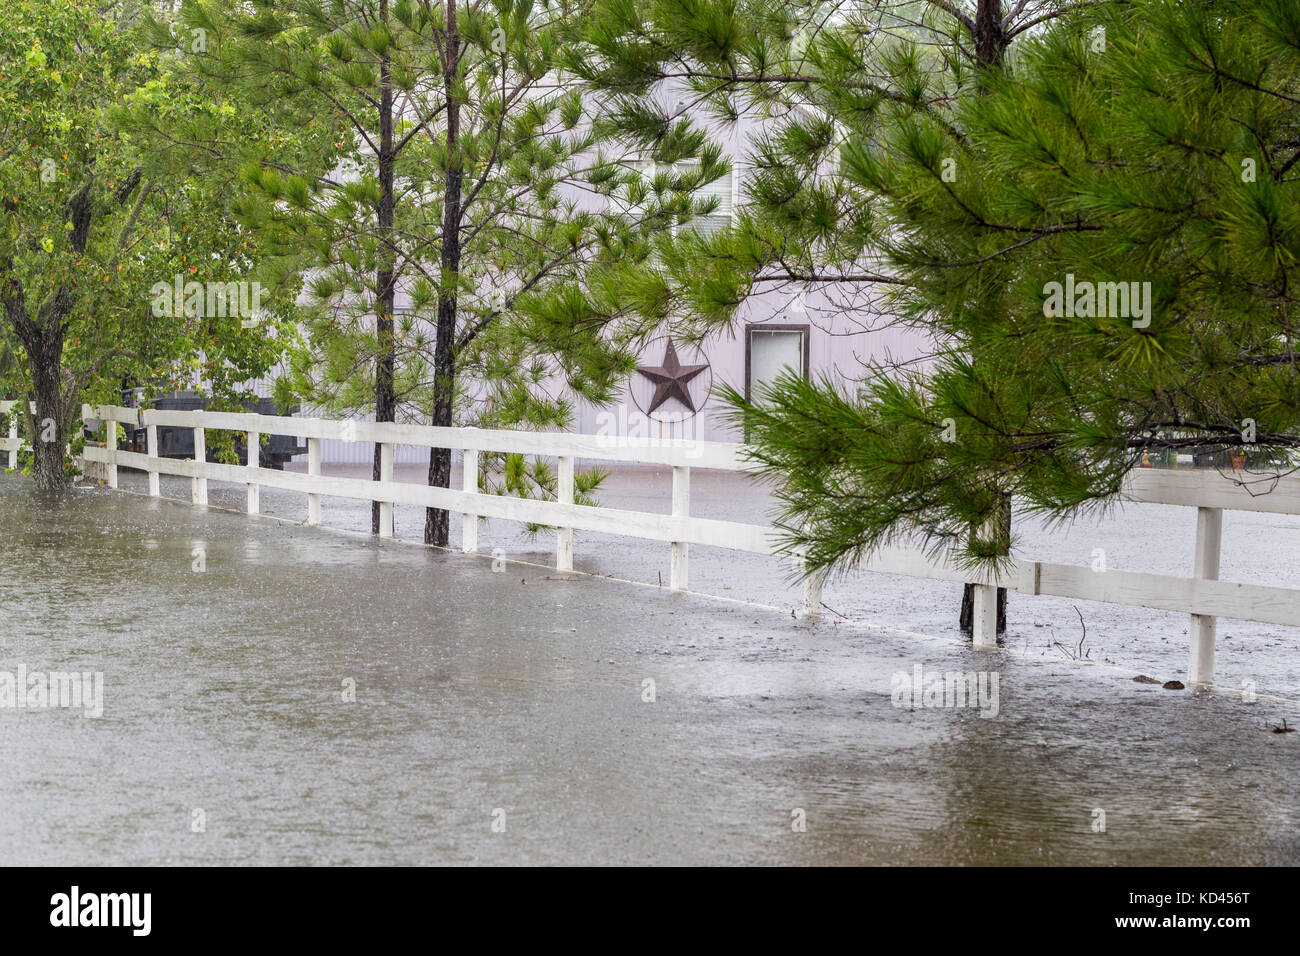 A general view of a shed surrounded by floodwaters in the aftermath of Hurricane Harvey Stock Photo